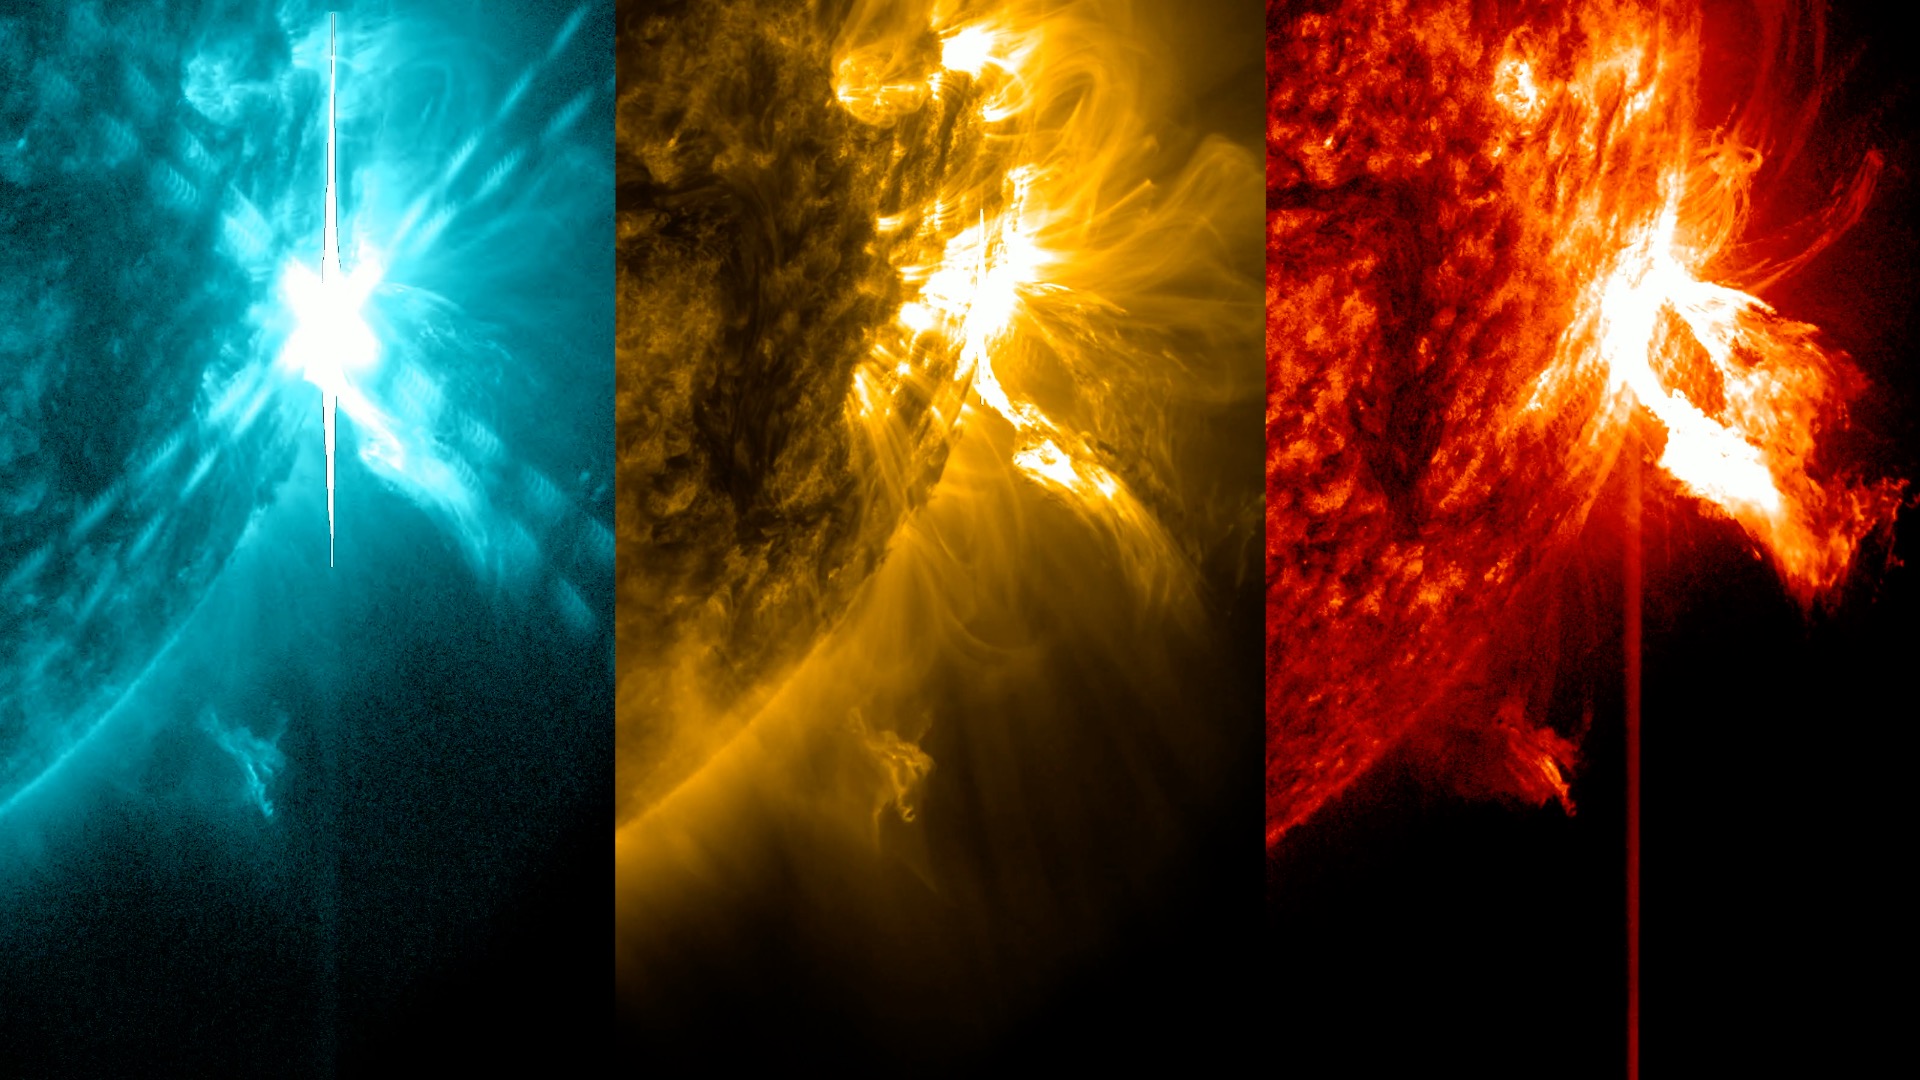 NASA’s Solar Dynamics Observatory captured these images of a solar flare – as seen in the bright flash on the right of each image – on Feb. 16, 2024. The images show three subsets of extreme ultraviolet light that highlight the extremely hot material in flares and which are colorized in teal, gold, and red. Credit: NASA/SDO